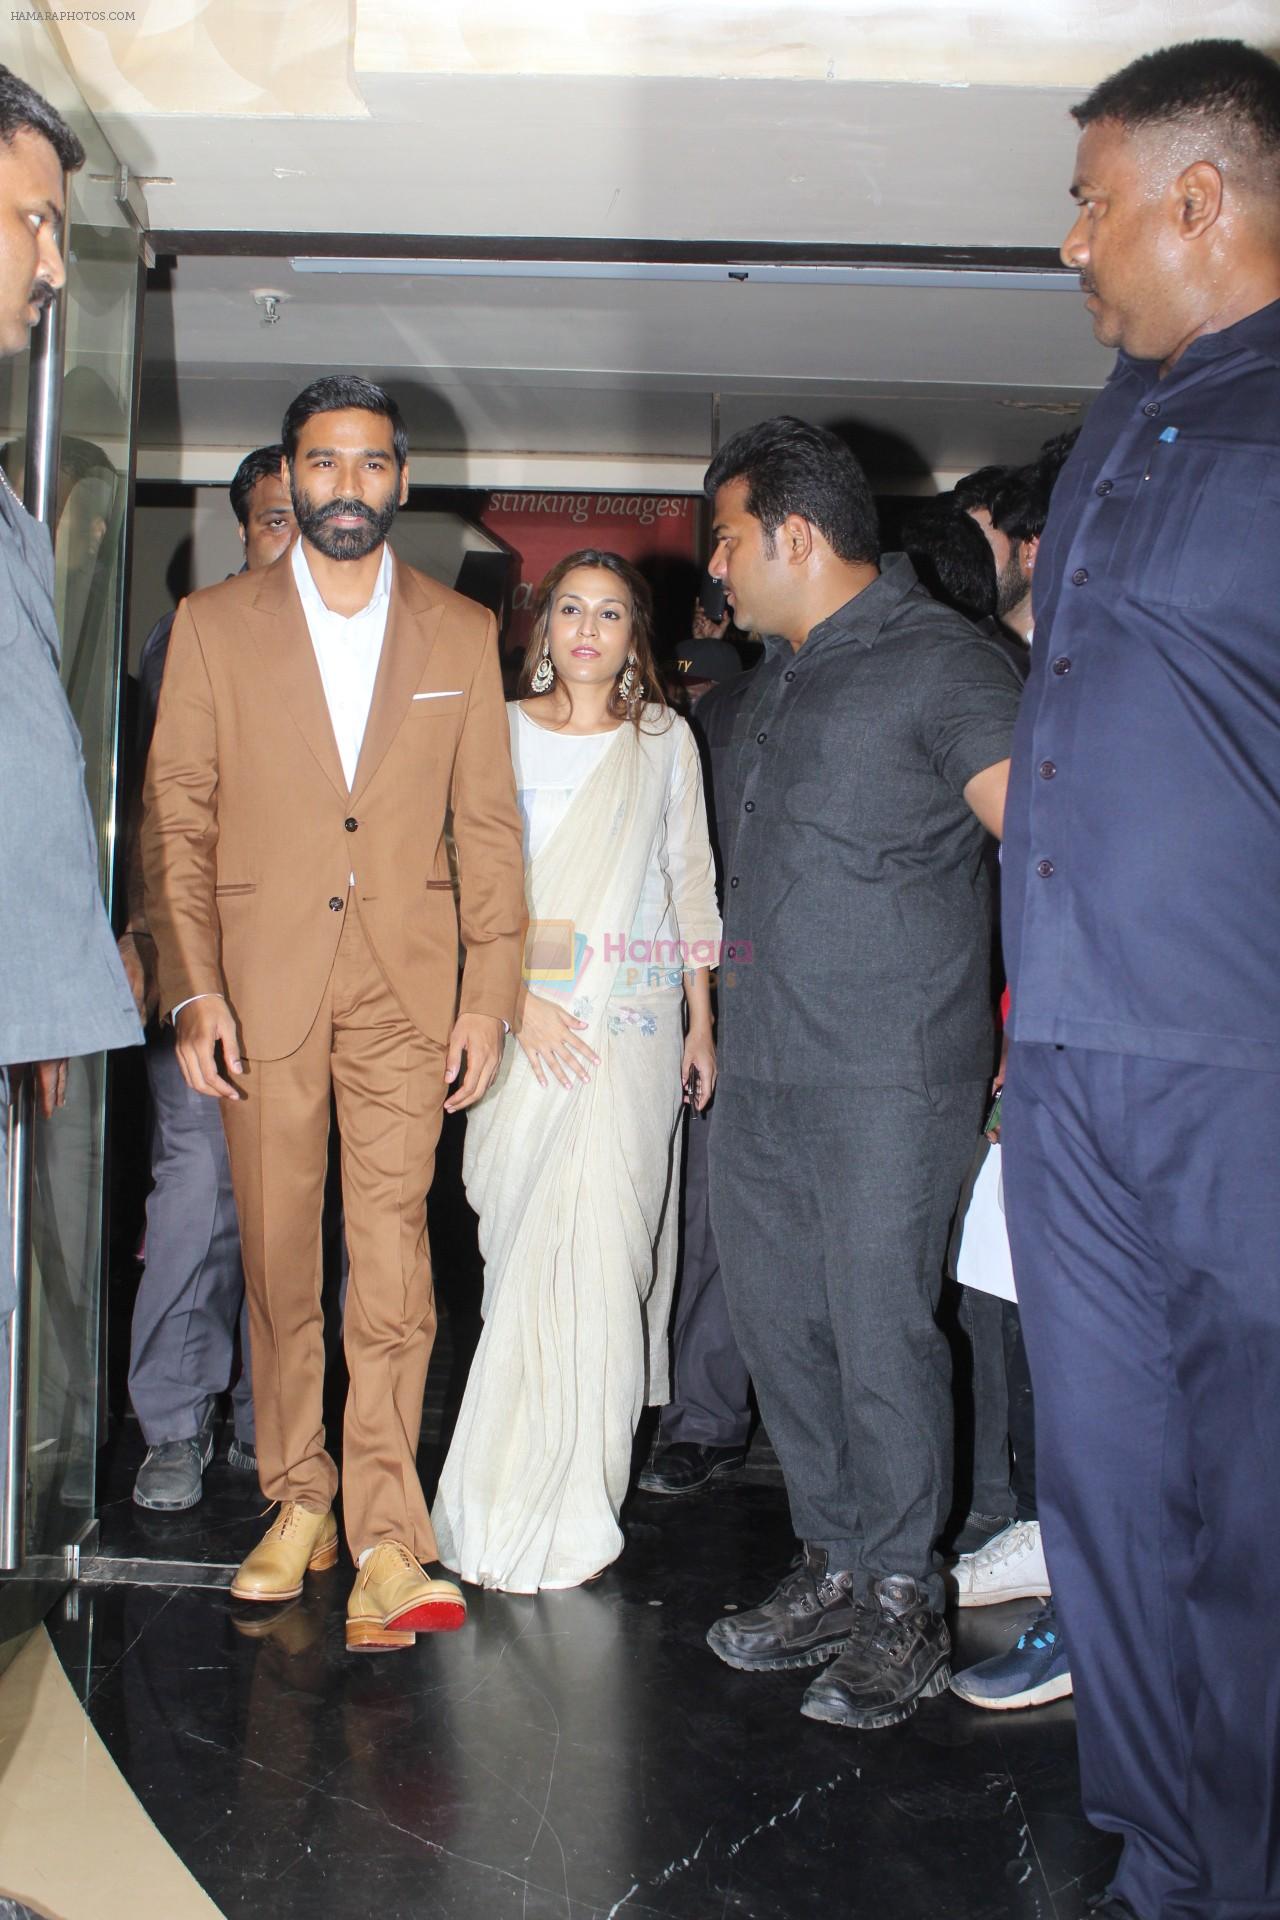 Dhanush At Grand Entry For Trailer Launch Of Film The Extraordinary Journey Of The Fakir on 3rd June 2019